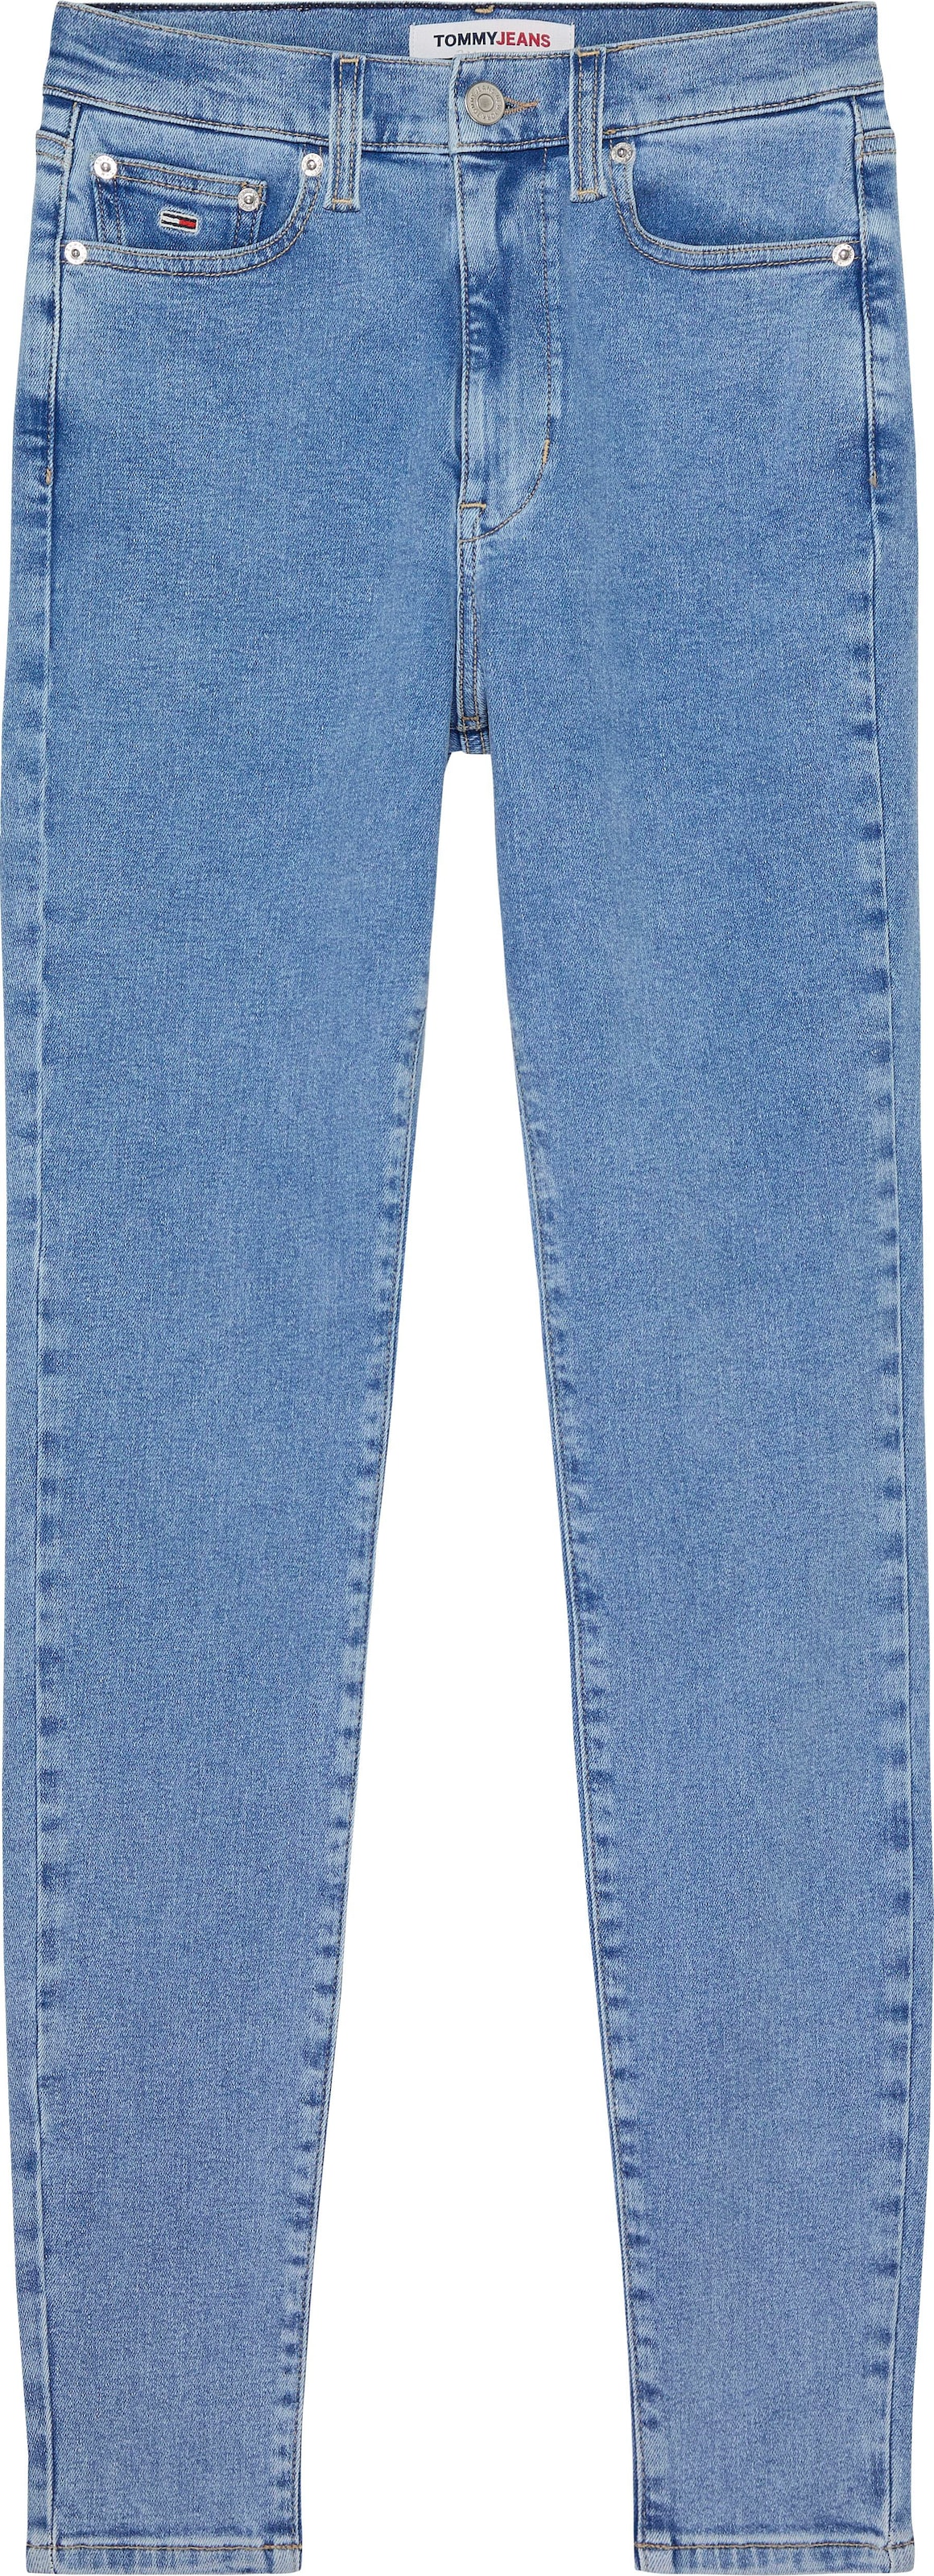 CG4«, Jeans mit und SYLVIA Skinny-fit-Jeans walking HR | Labelflags »Jeans shoppen Tommy I\'m Logobadge SSKN